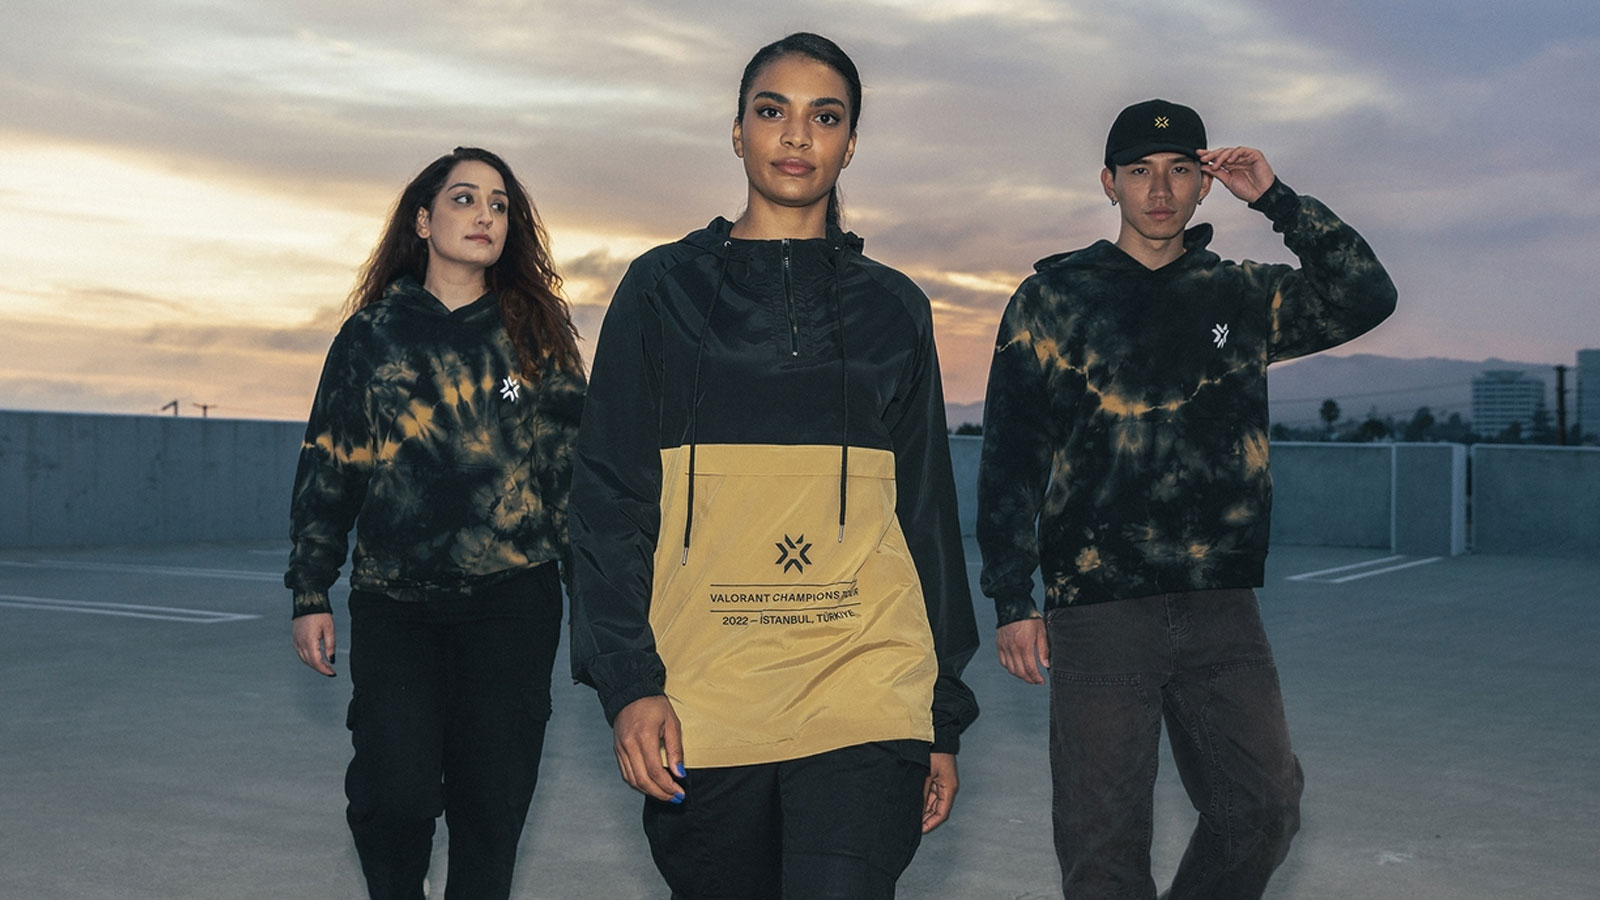 Get your hands on the Valorant Champions 2022 apparel collection